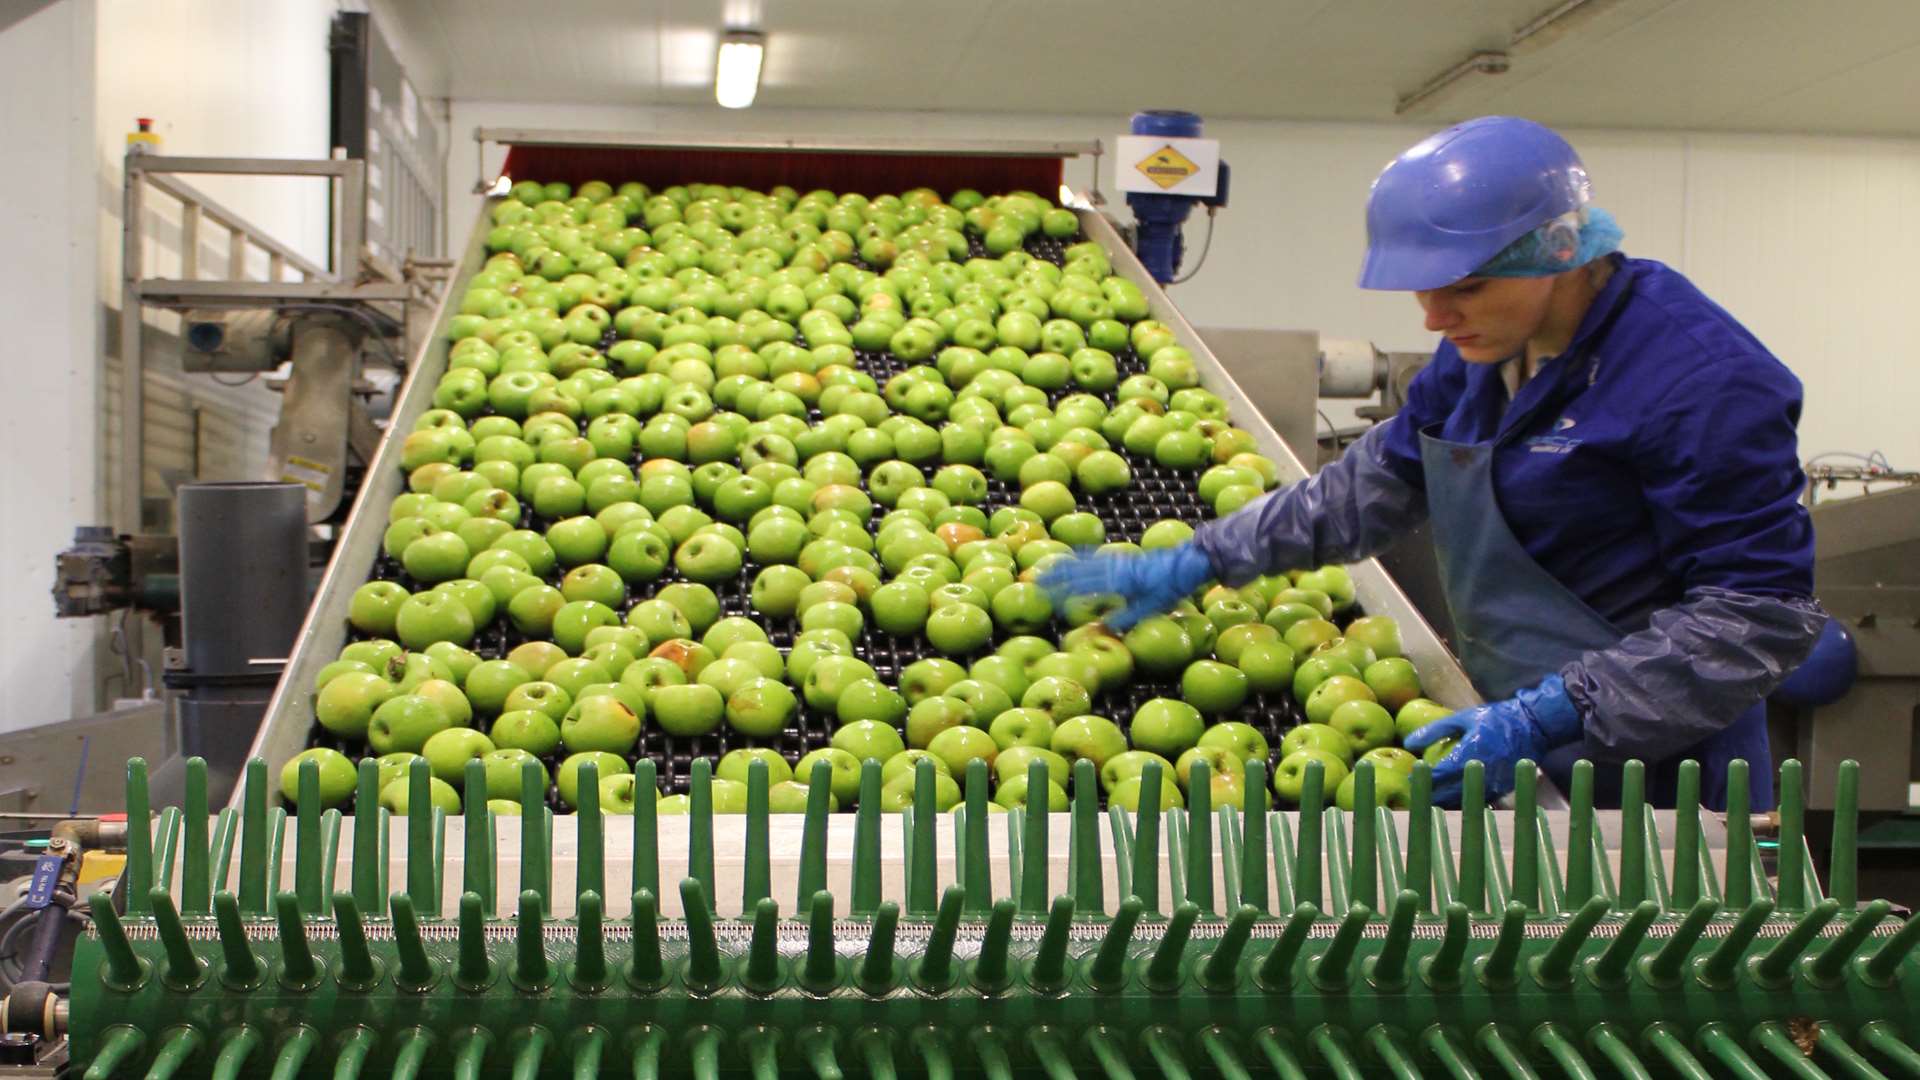 Fourayes Farm is the UK's largest grower and processor of Bramley apples